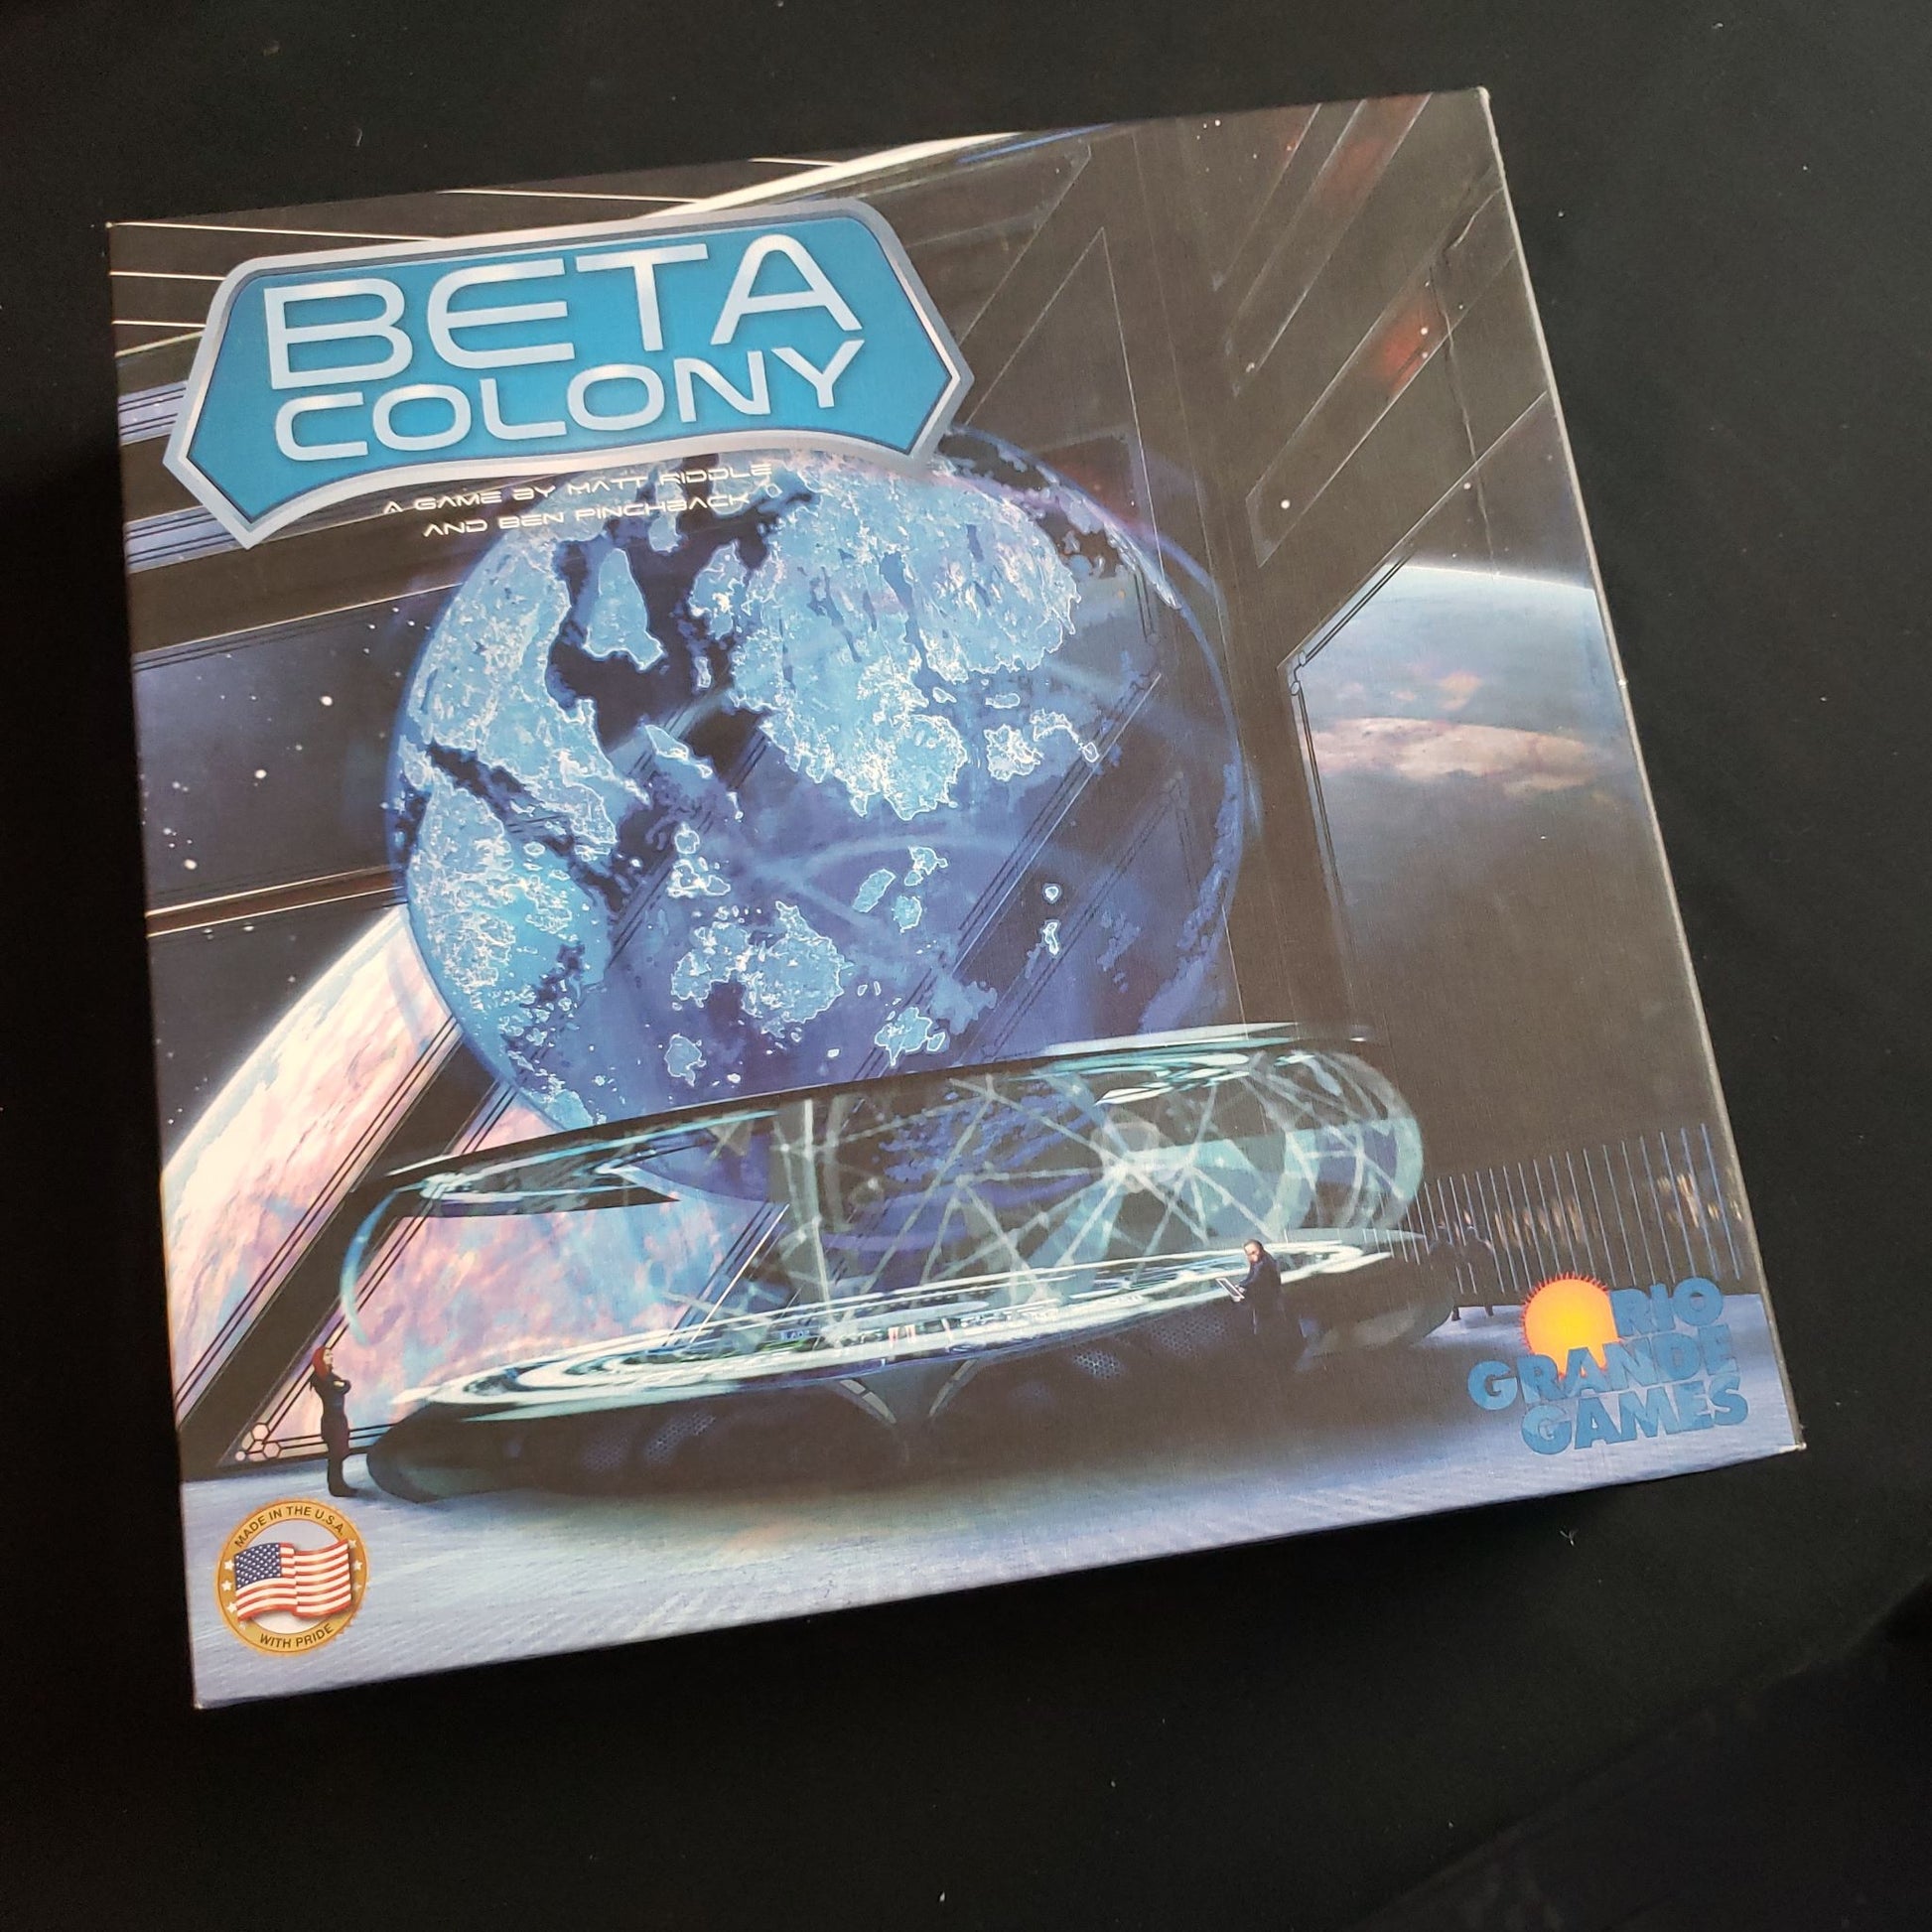 Image shows the front cover of the box of the Beta Colony board game